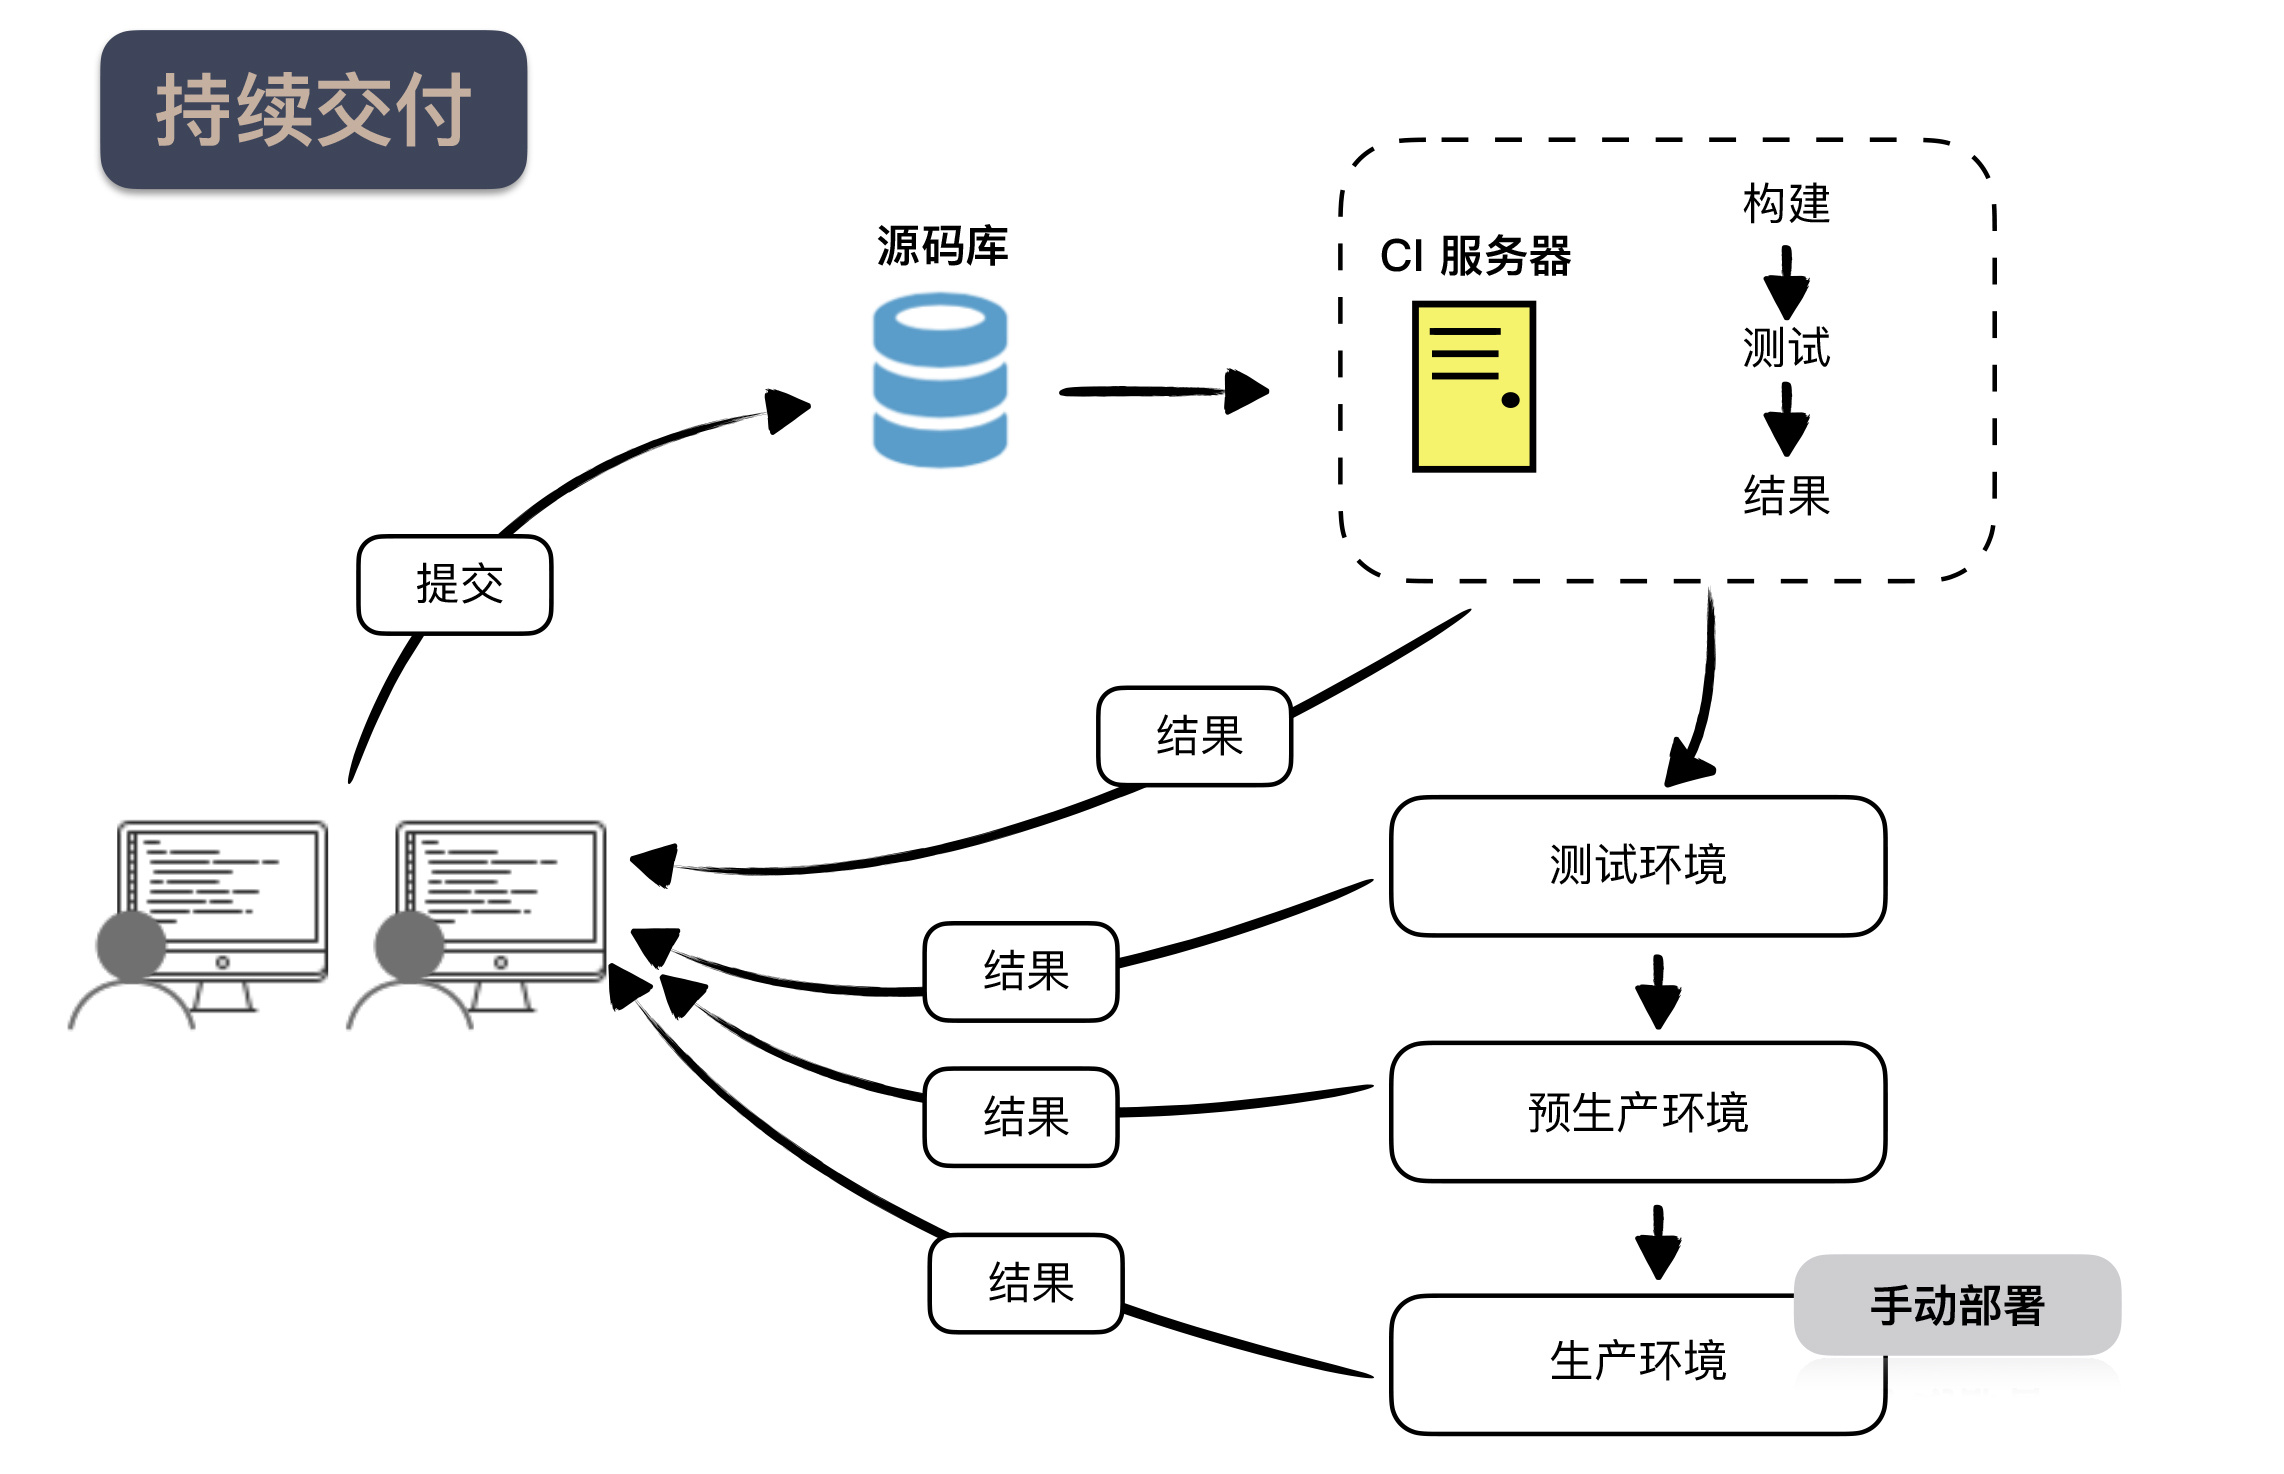 https://img.zhaoweiguo.com/knowledge/images/devops/cicds/cicd2.jpeg